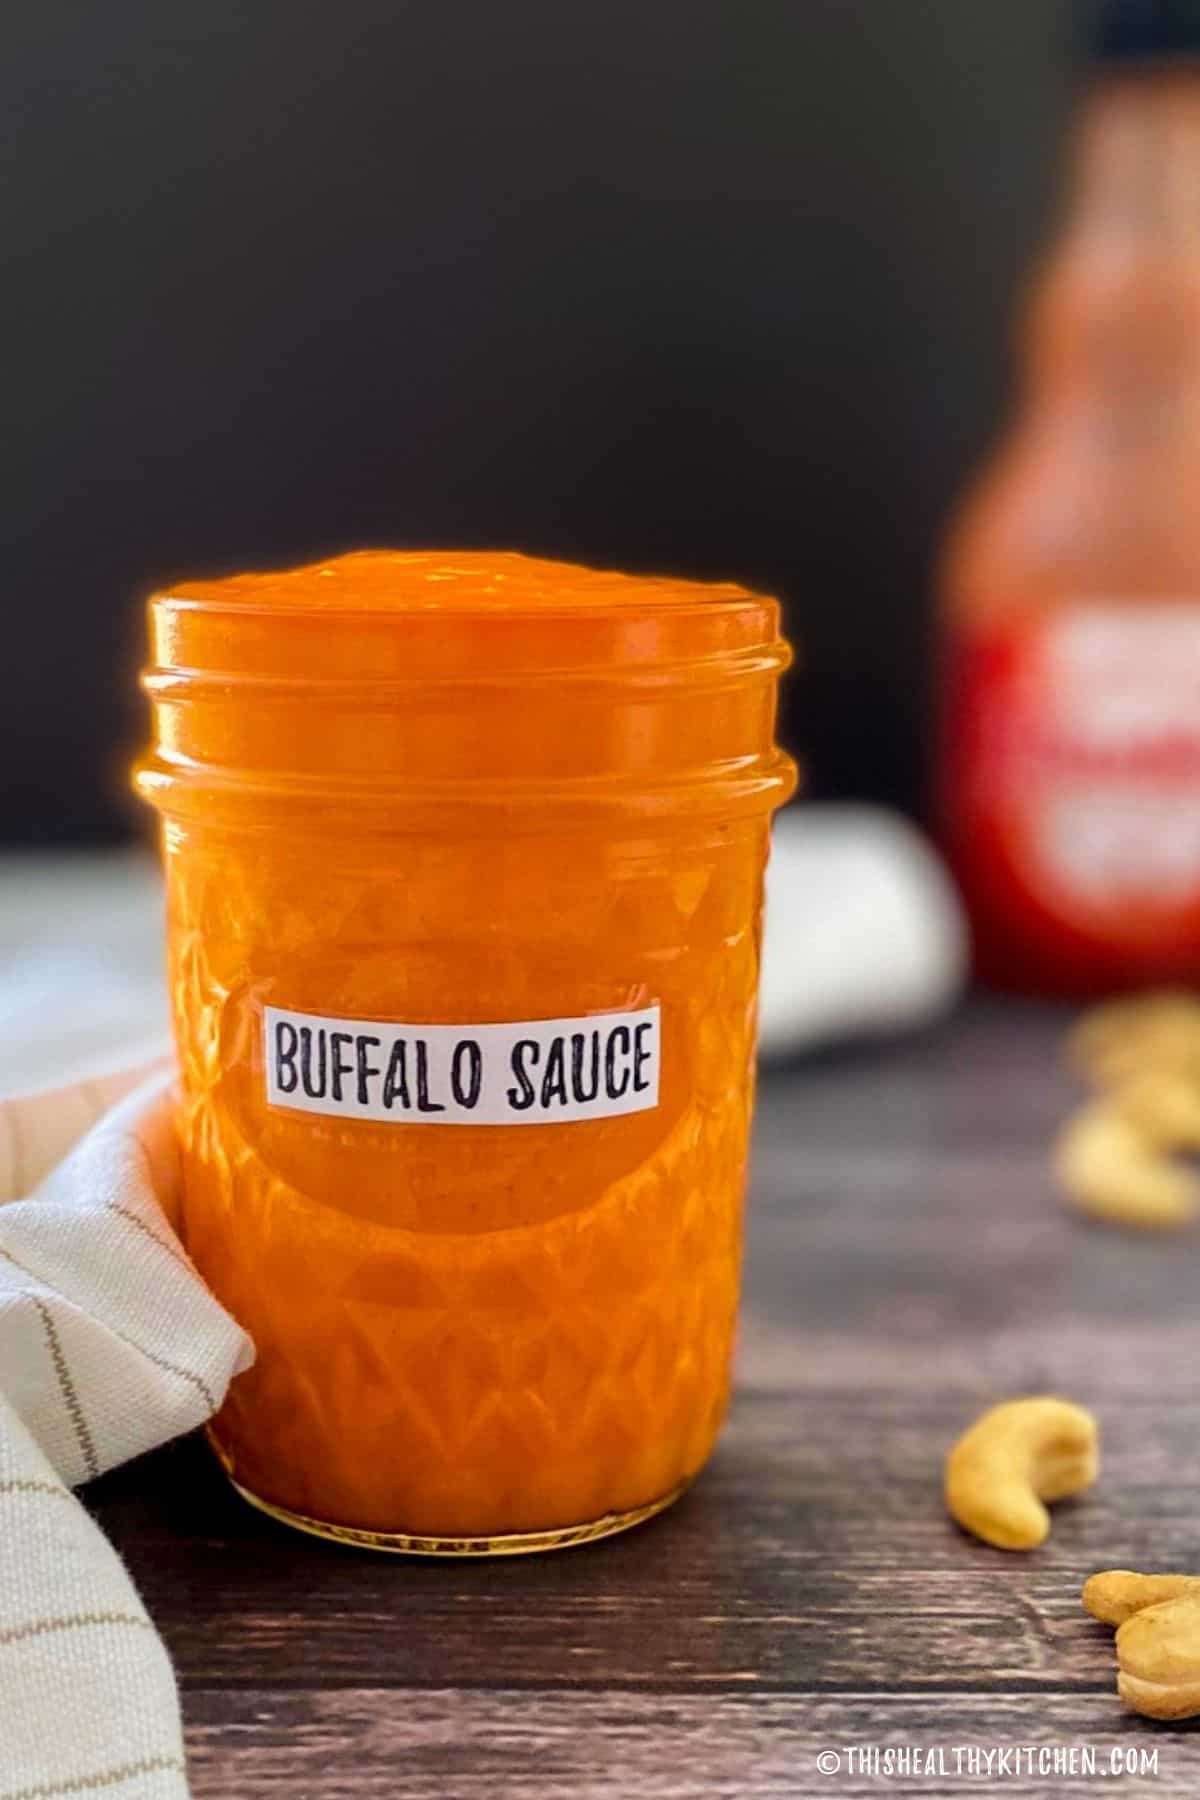 Glass jar with buffalo sauce inside and bottle of Franks hot sauce behind it.